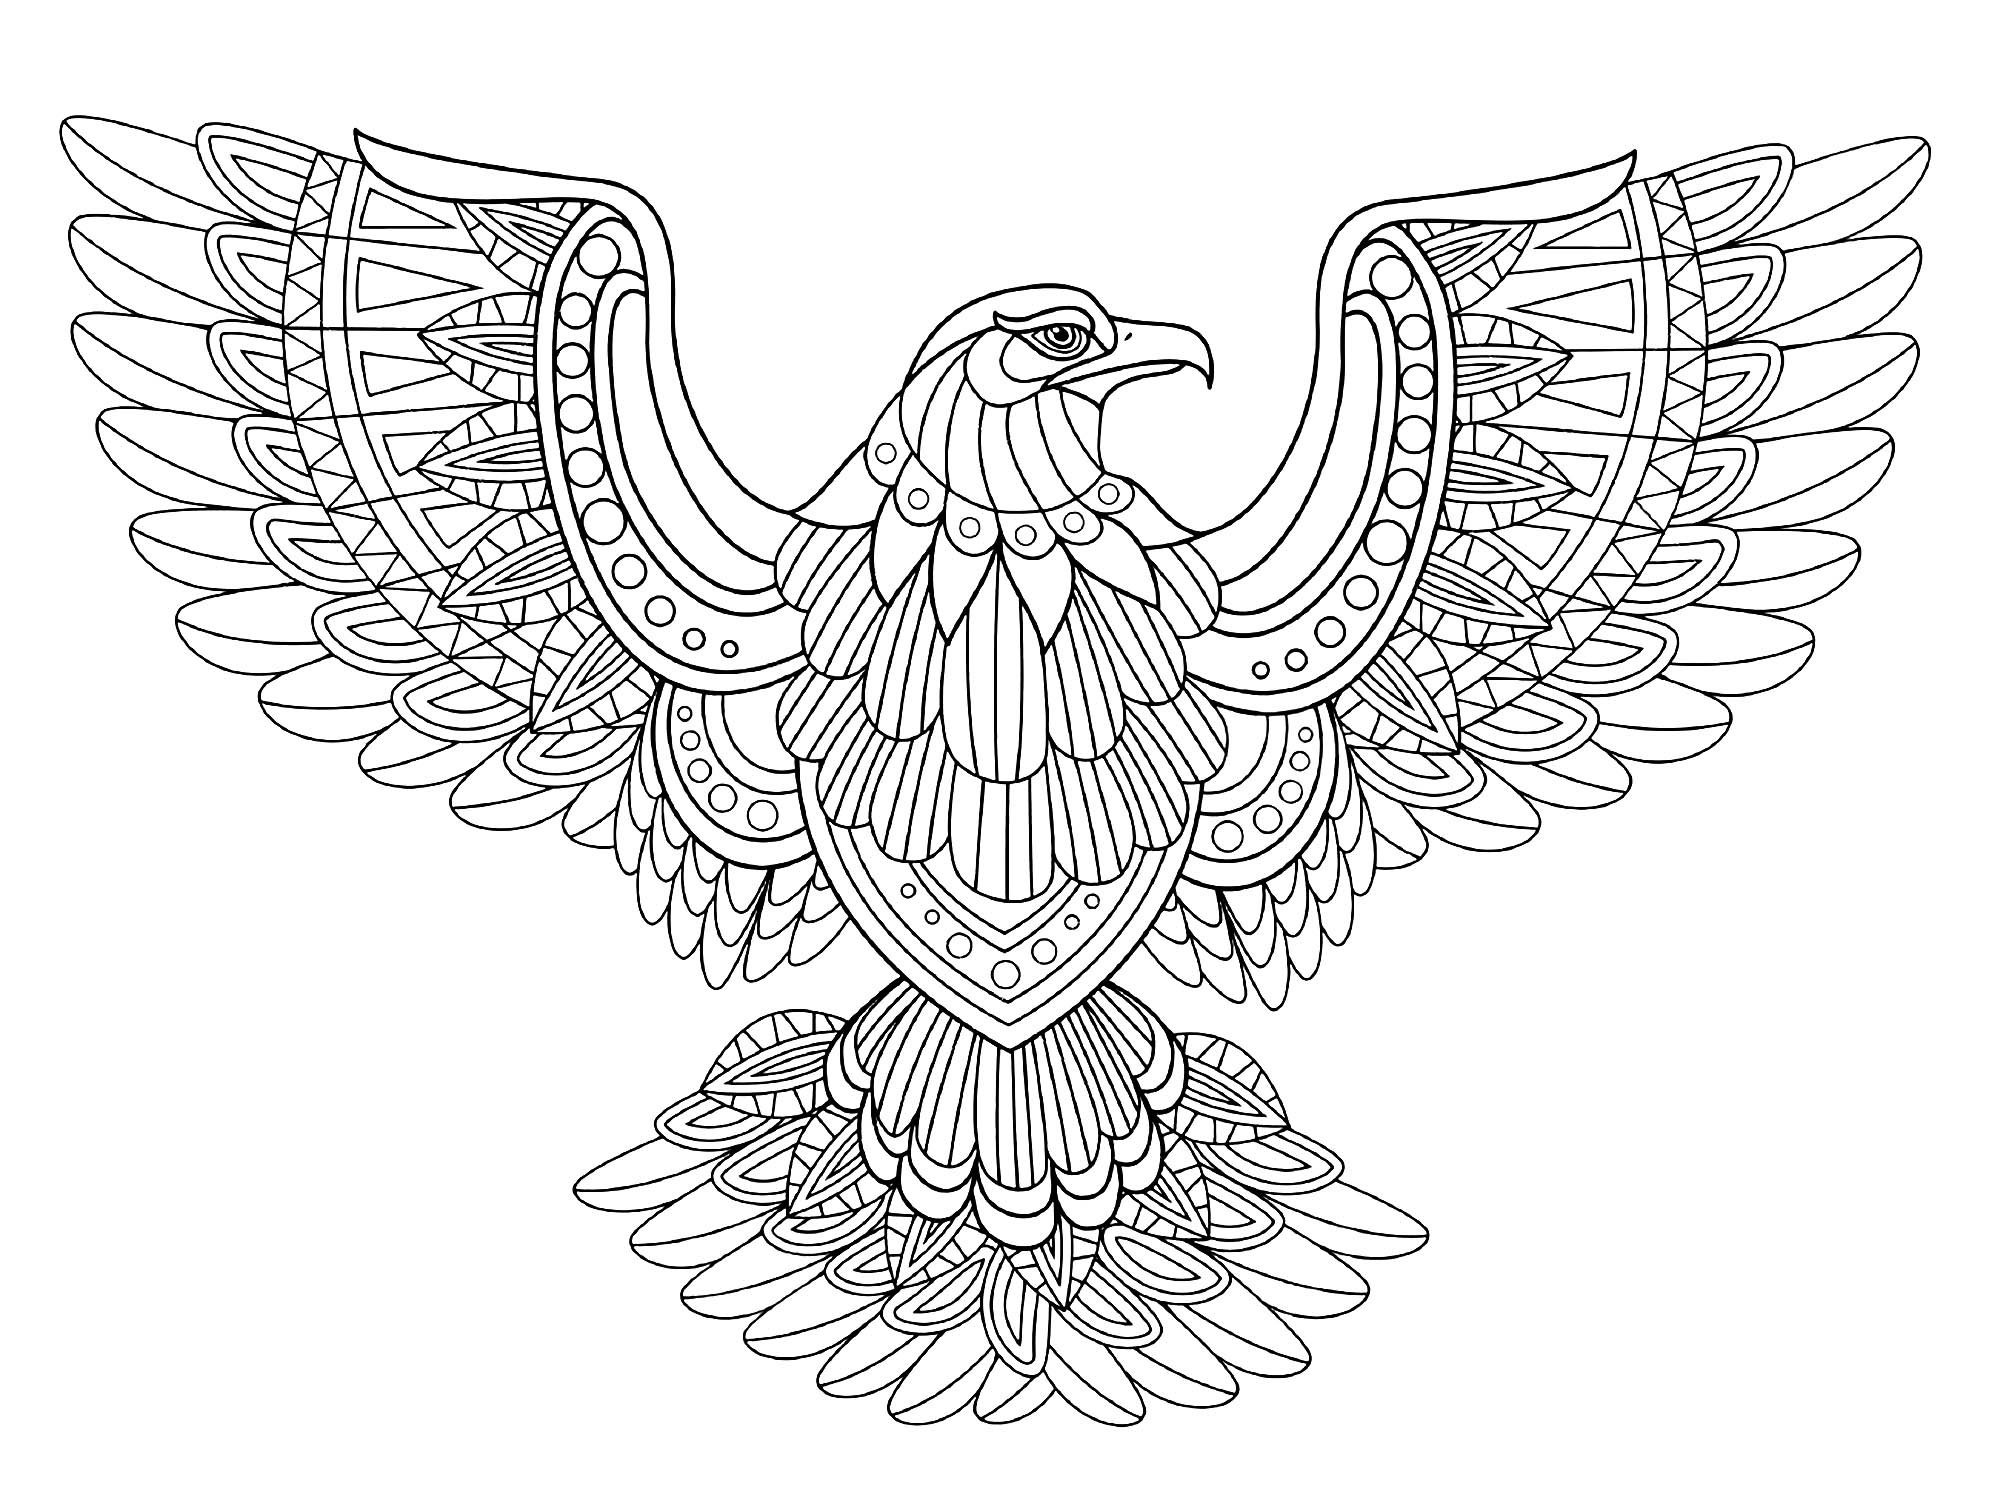 Download Flying eagle - Birds Adult Coloring Pages